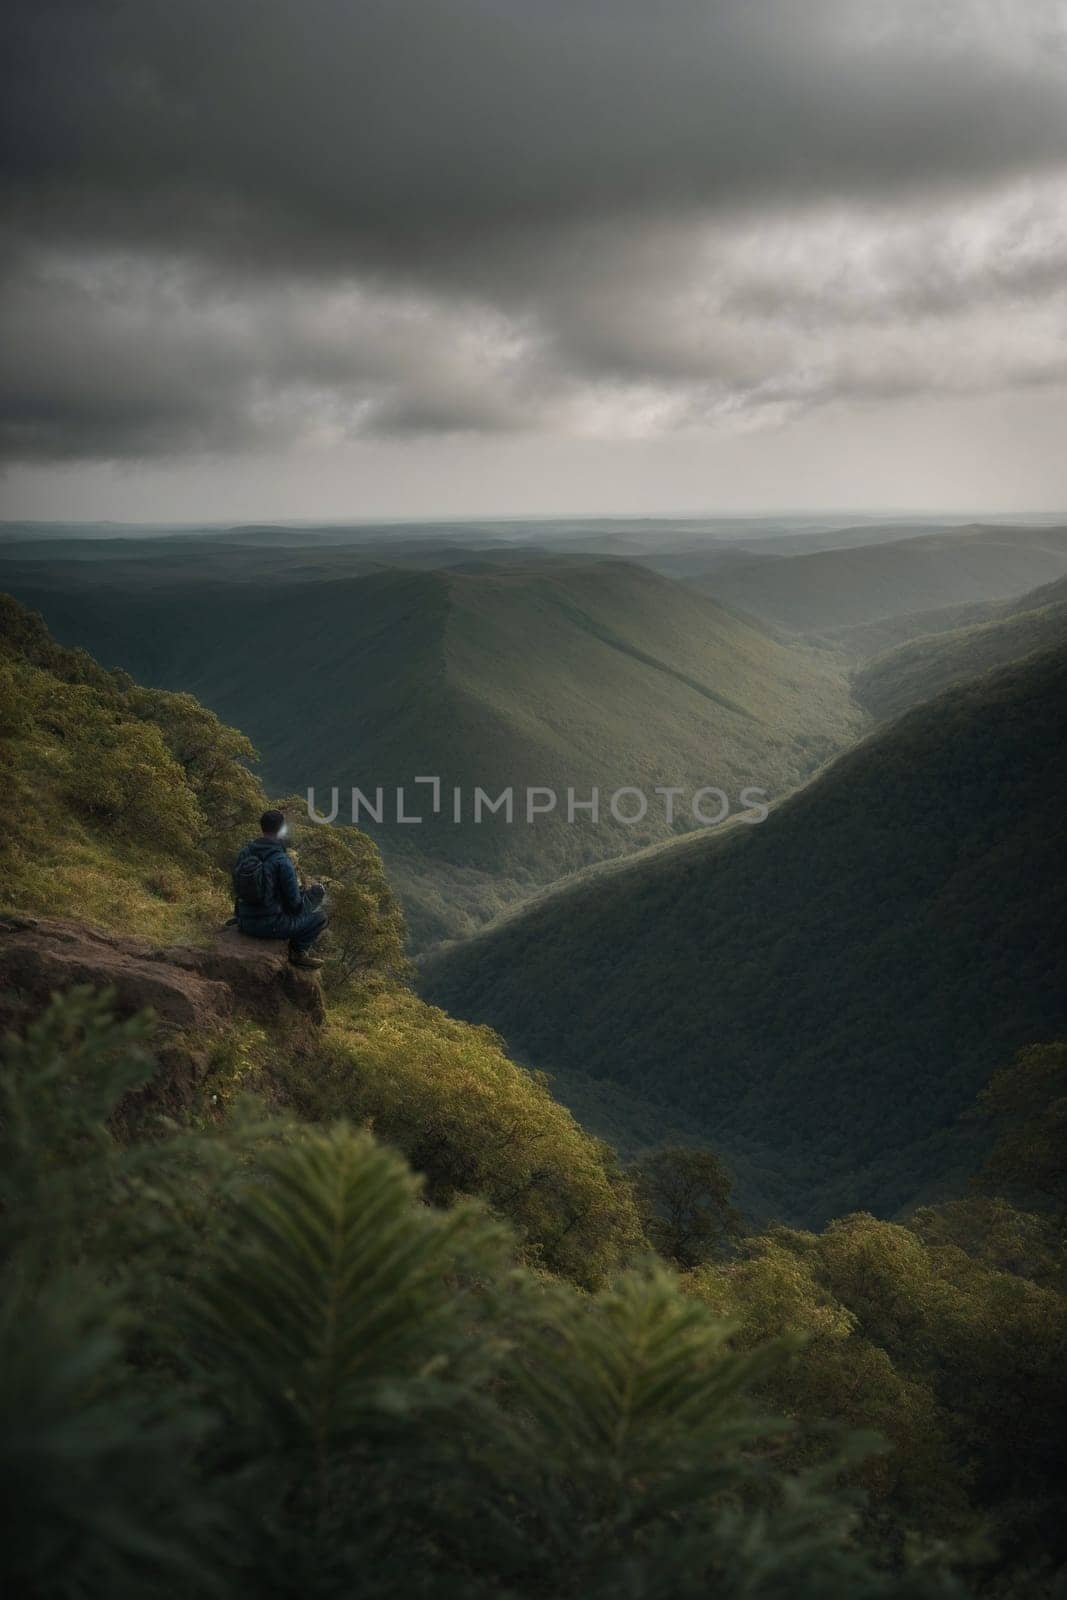 A man sitting peacefully on the lush green hillside, taking in the breathtaking scenery.